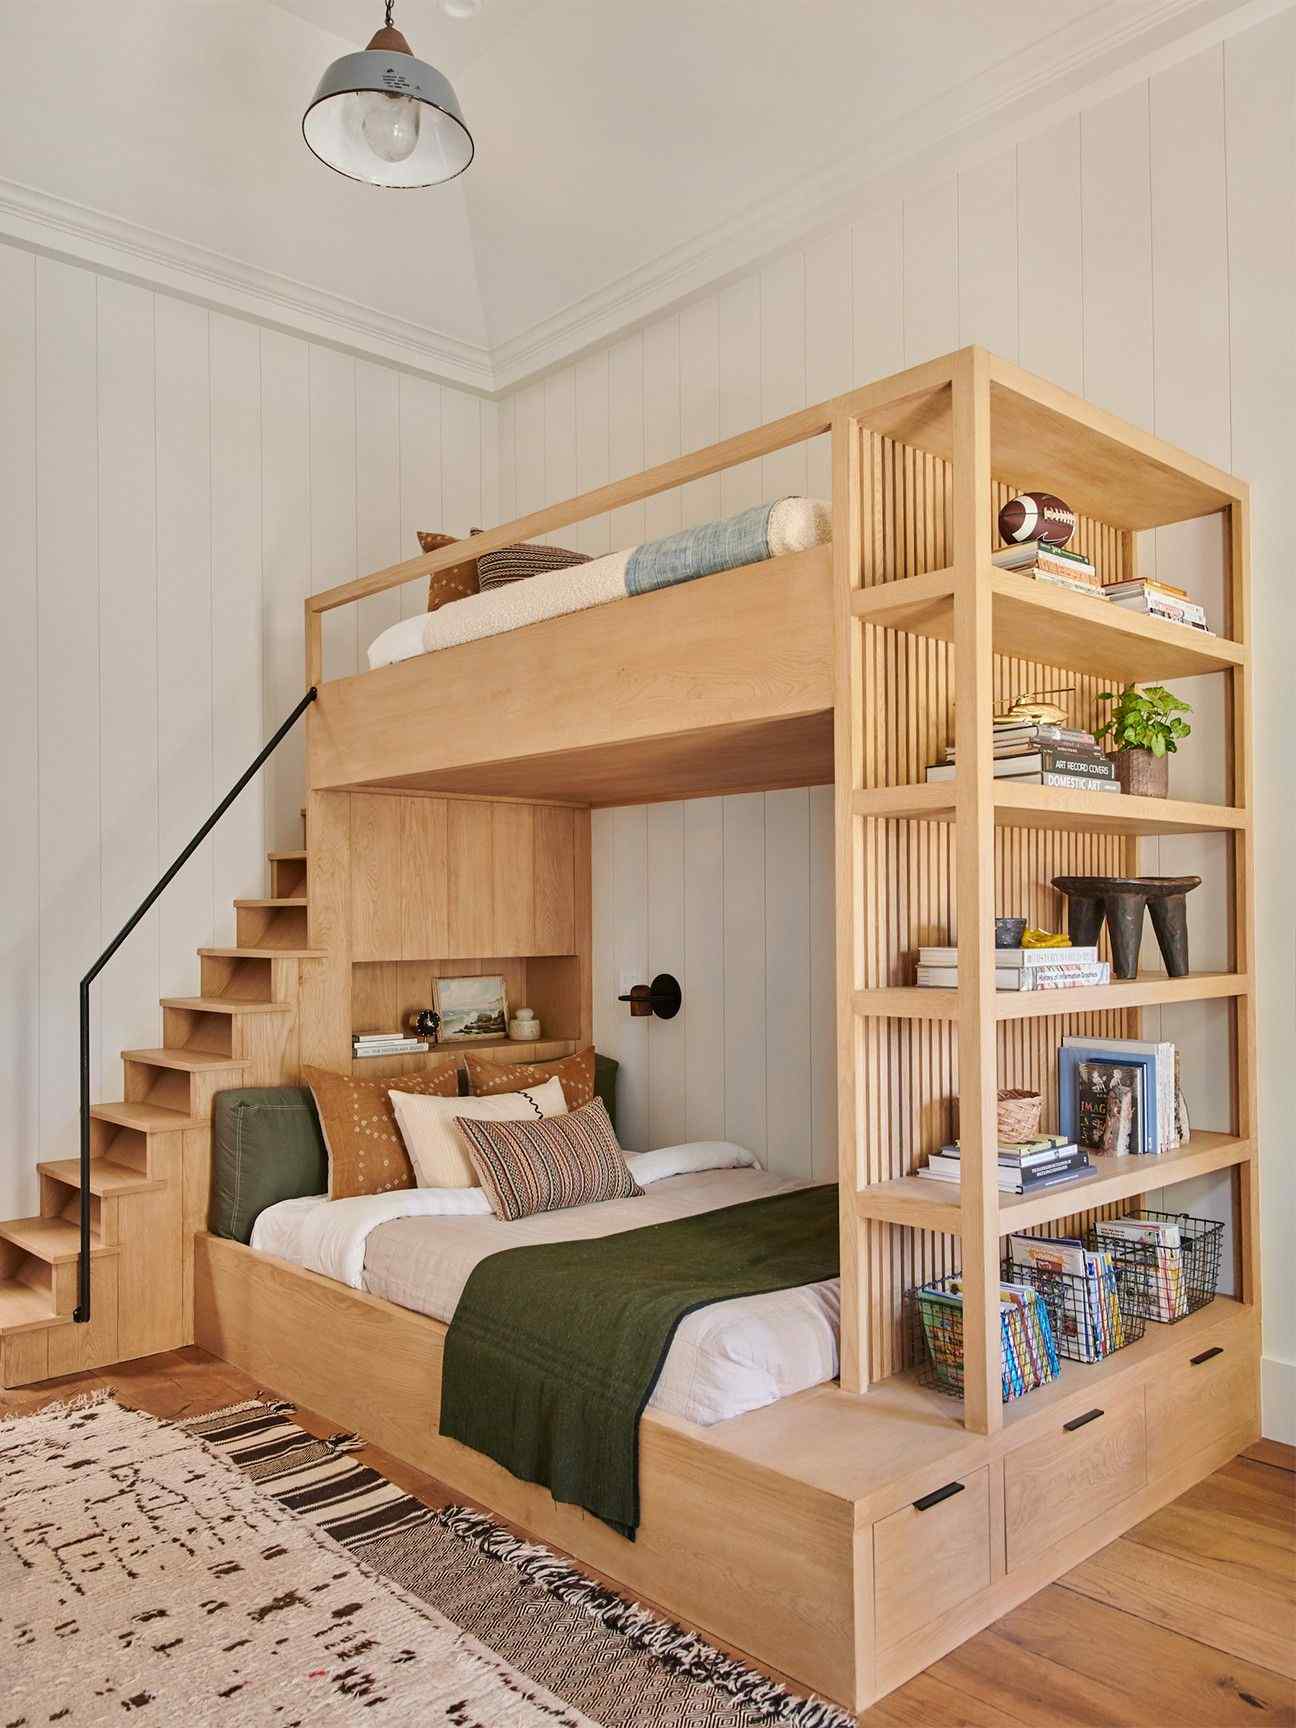 Some Fun Bunk Bed Designs for All Ages